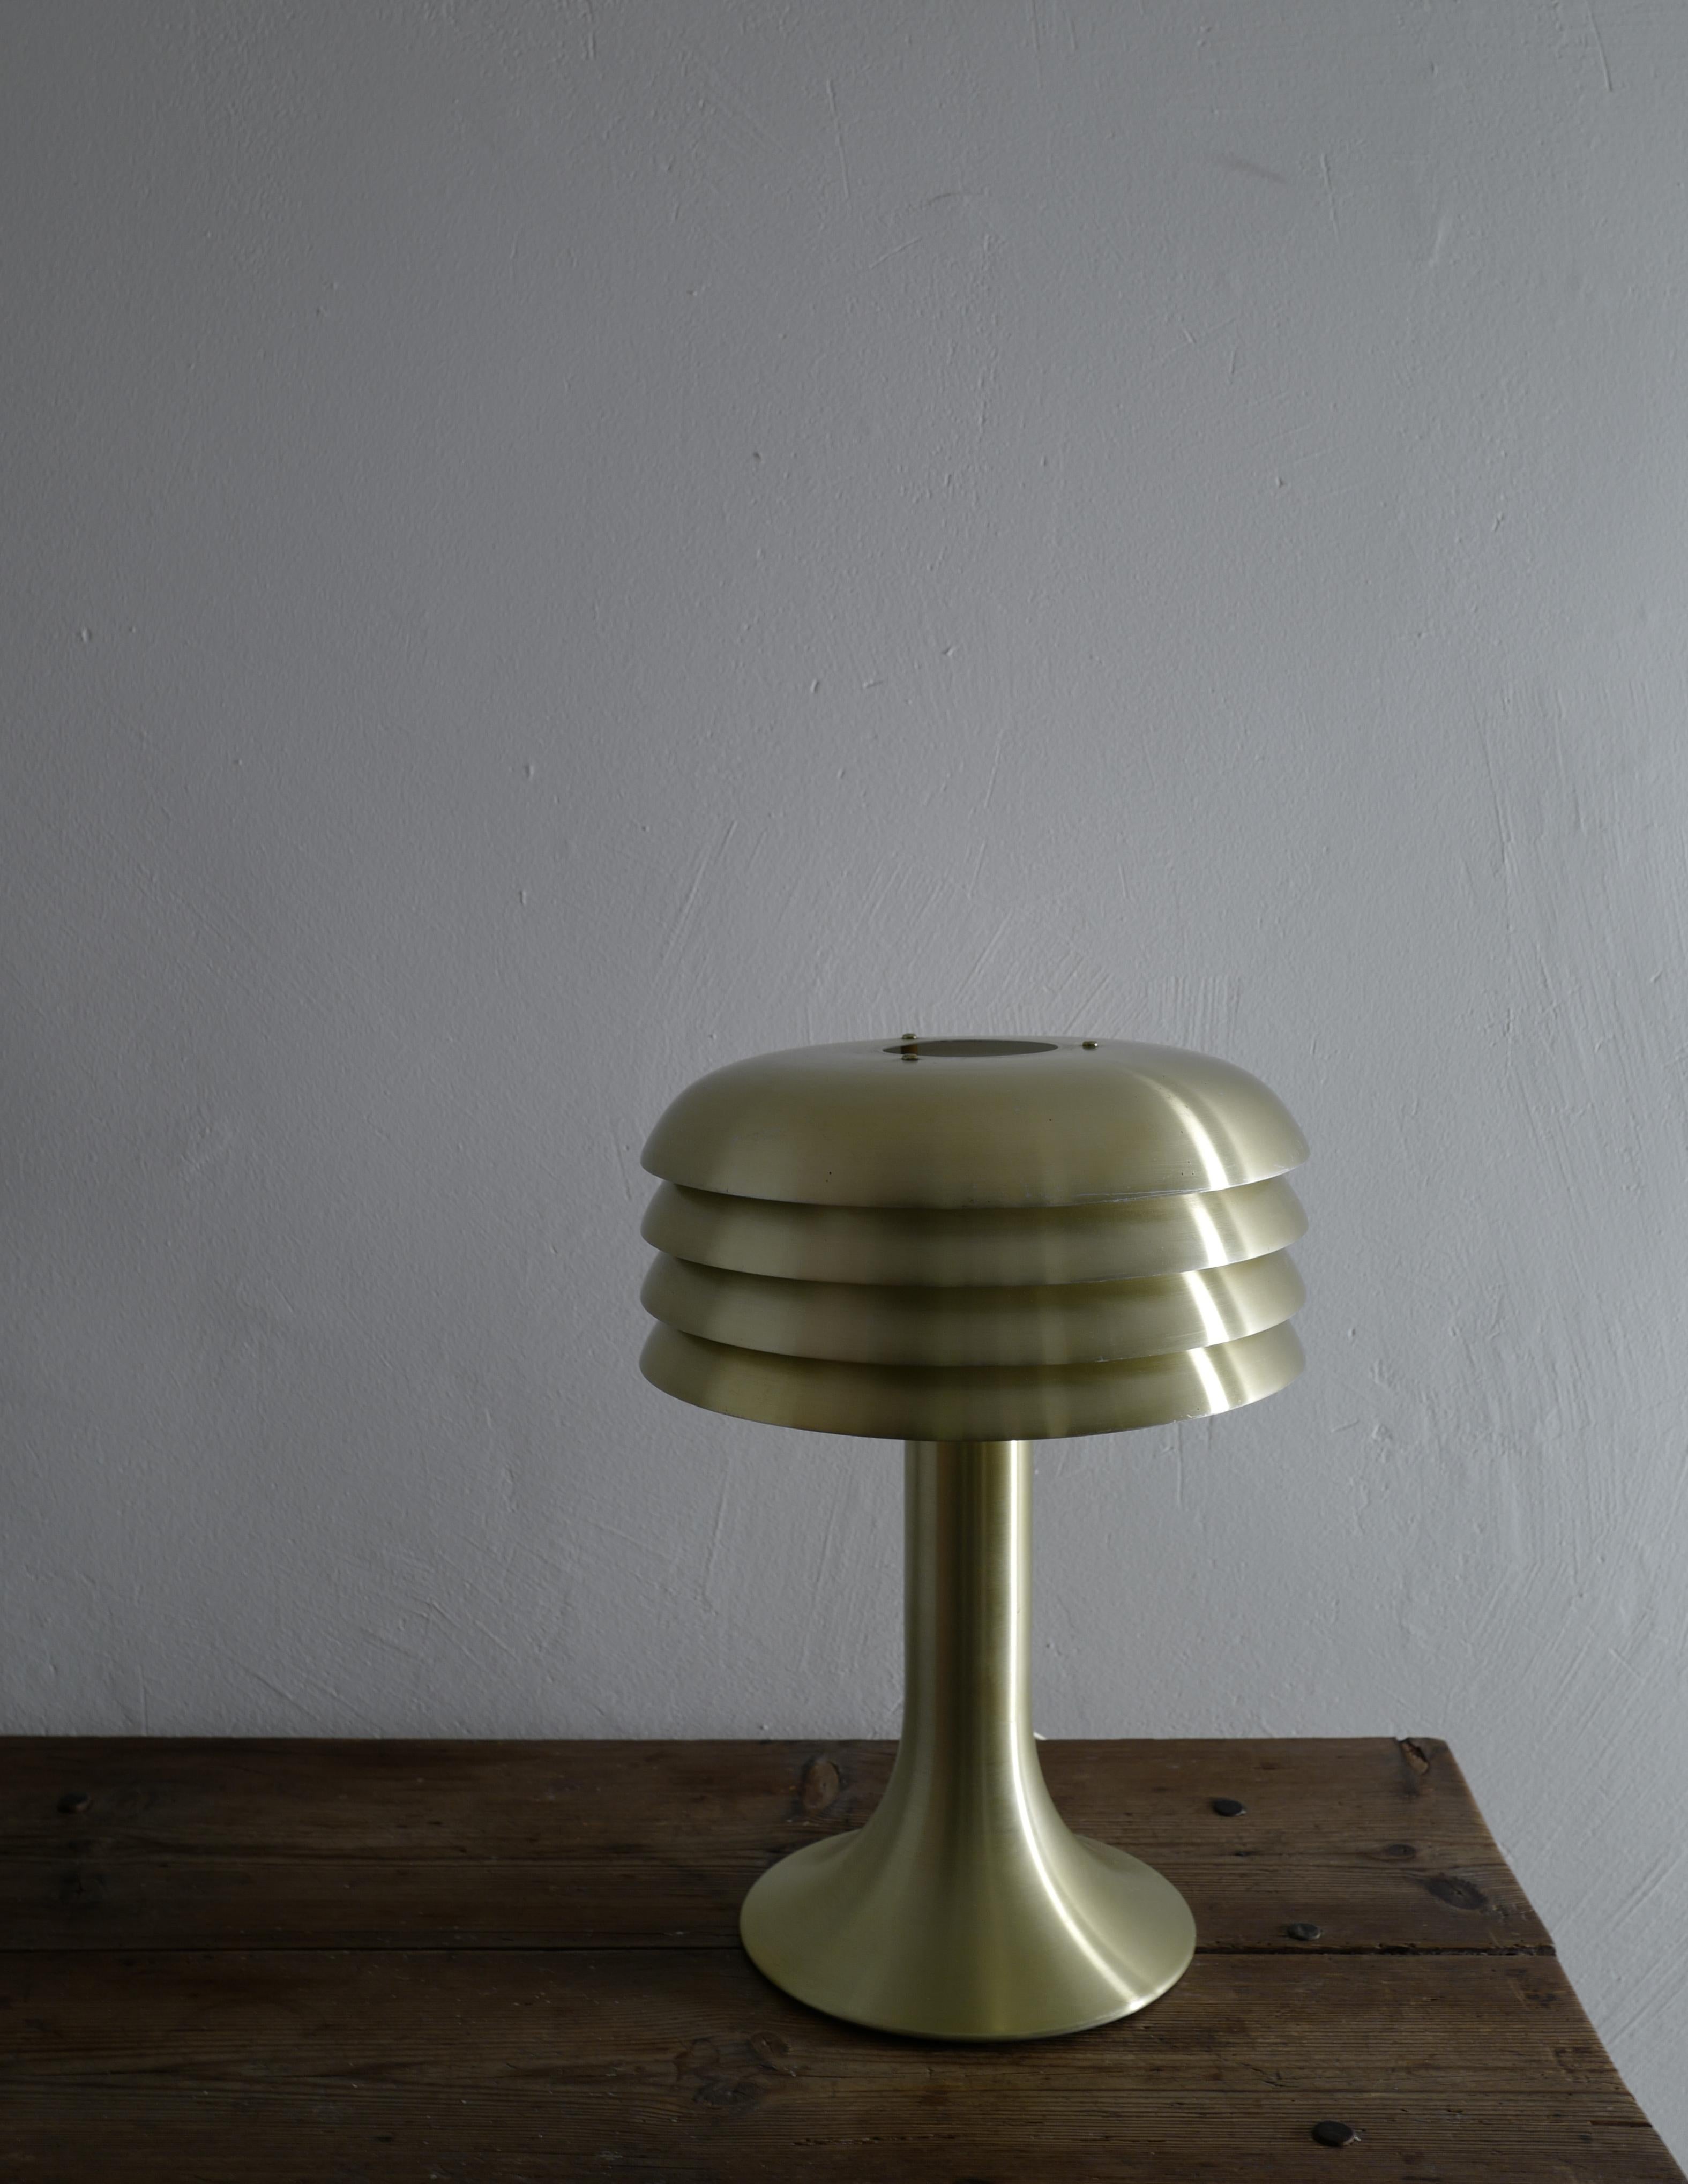 Rare table lamp model BN-26 designed by Hans-Agne Jakobsson. 
Produced by Hans-Agne Jakobsson AB in Markaryd, Sweden.

In good vintage condition with some signs of use.